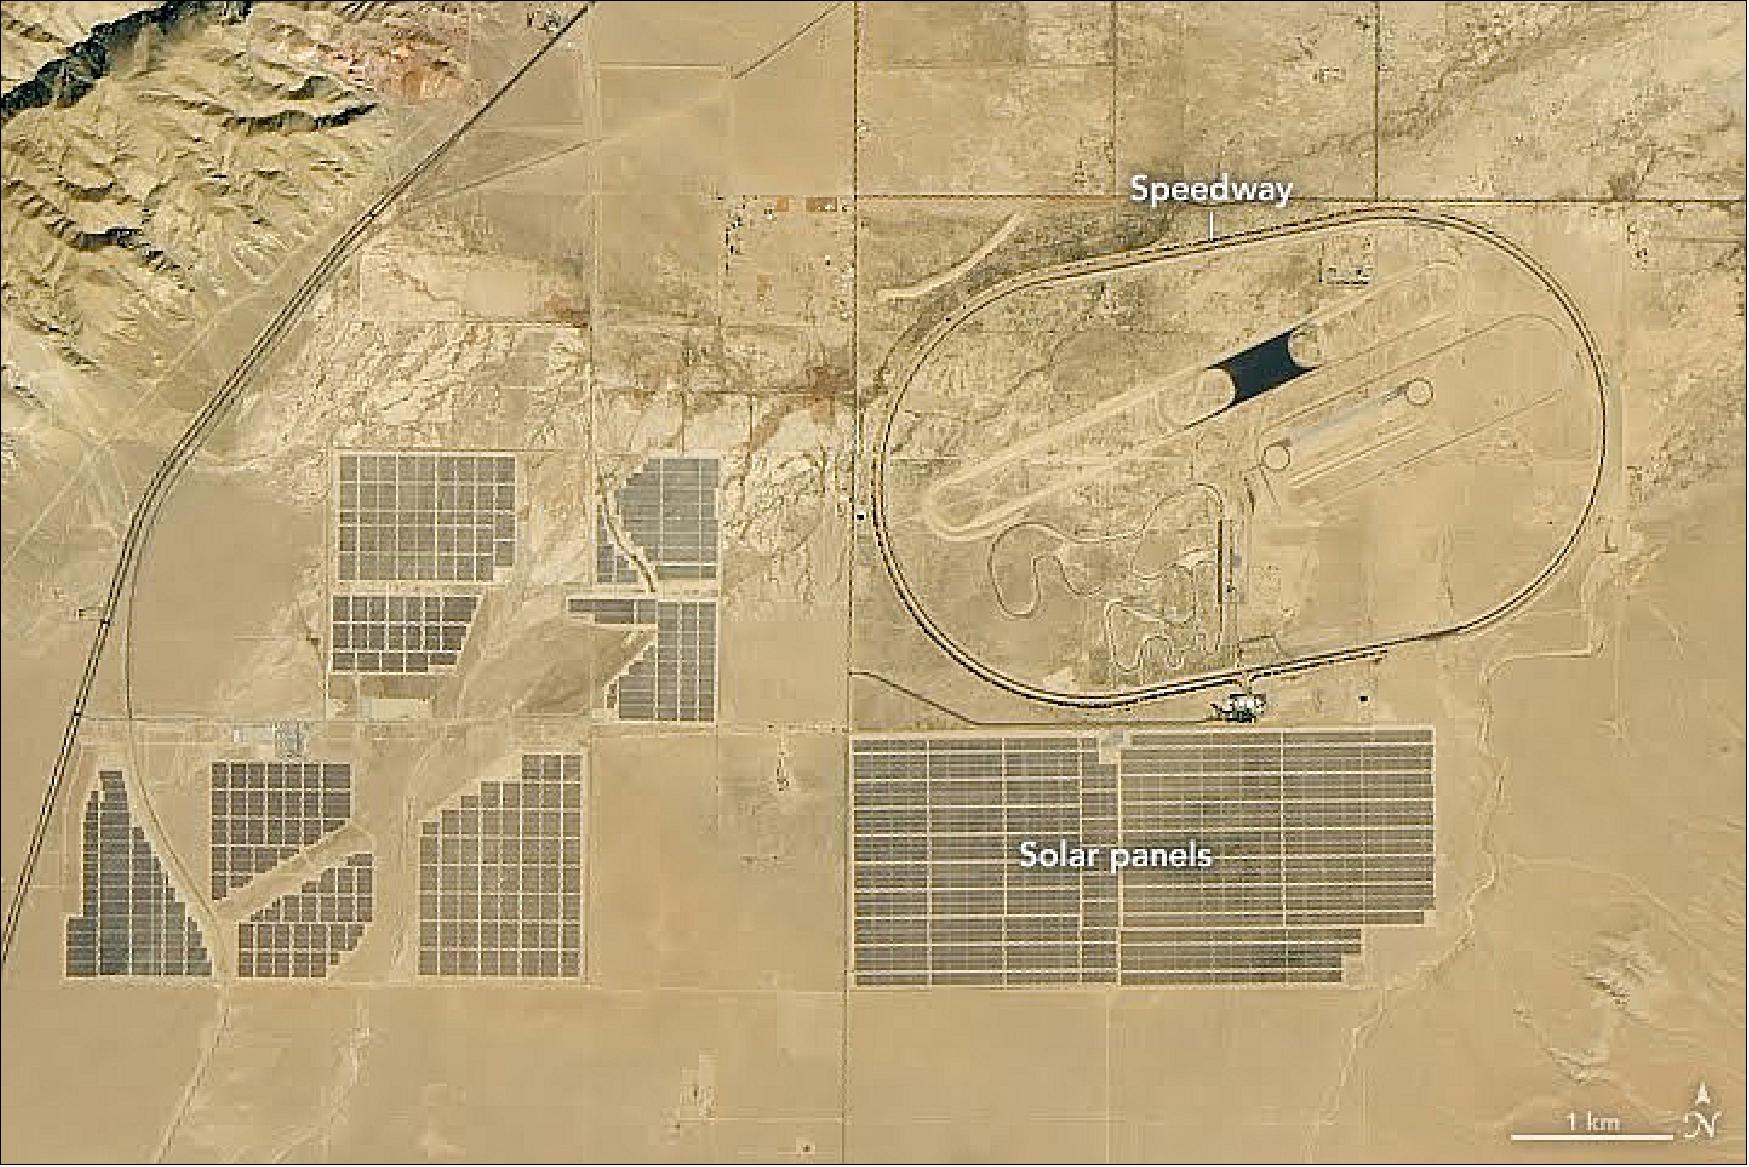 Figure 55: Surrounded by solar panels, engineers test automobiles, motorcycles, and ATVs at speeds up to 320 km/hour on the winding roads of the Honda Proving Center (below). The prison (Figure 51), which used to hold people detained by U.S. immigration officials, now houses 2,300 inmates from California (image credit: NASA Earth Observatory, image by Lauren Dauphin, using Landsat data, observed on 18 October 2018, from the U.S. Geological Survey. Story by Adam Voiland)